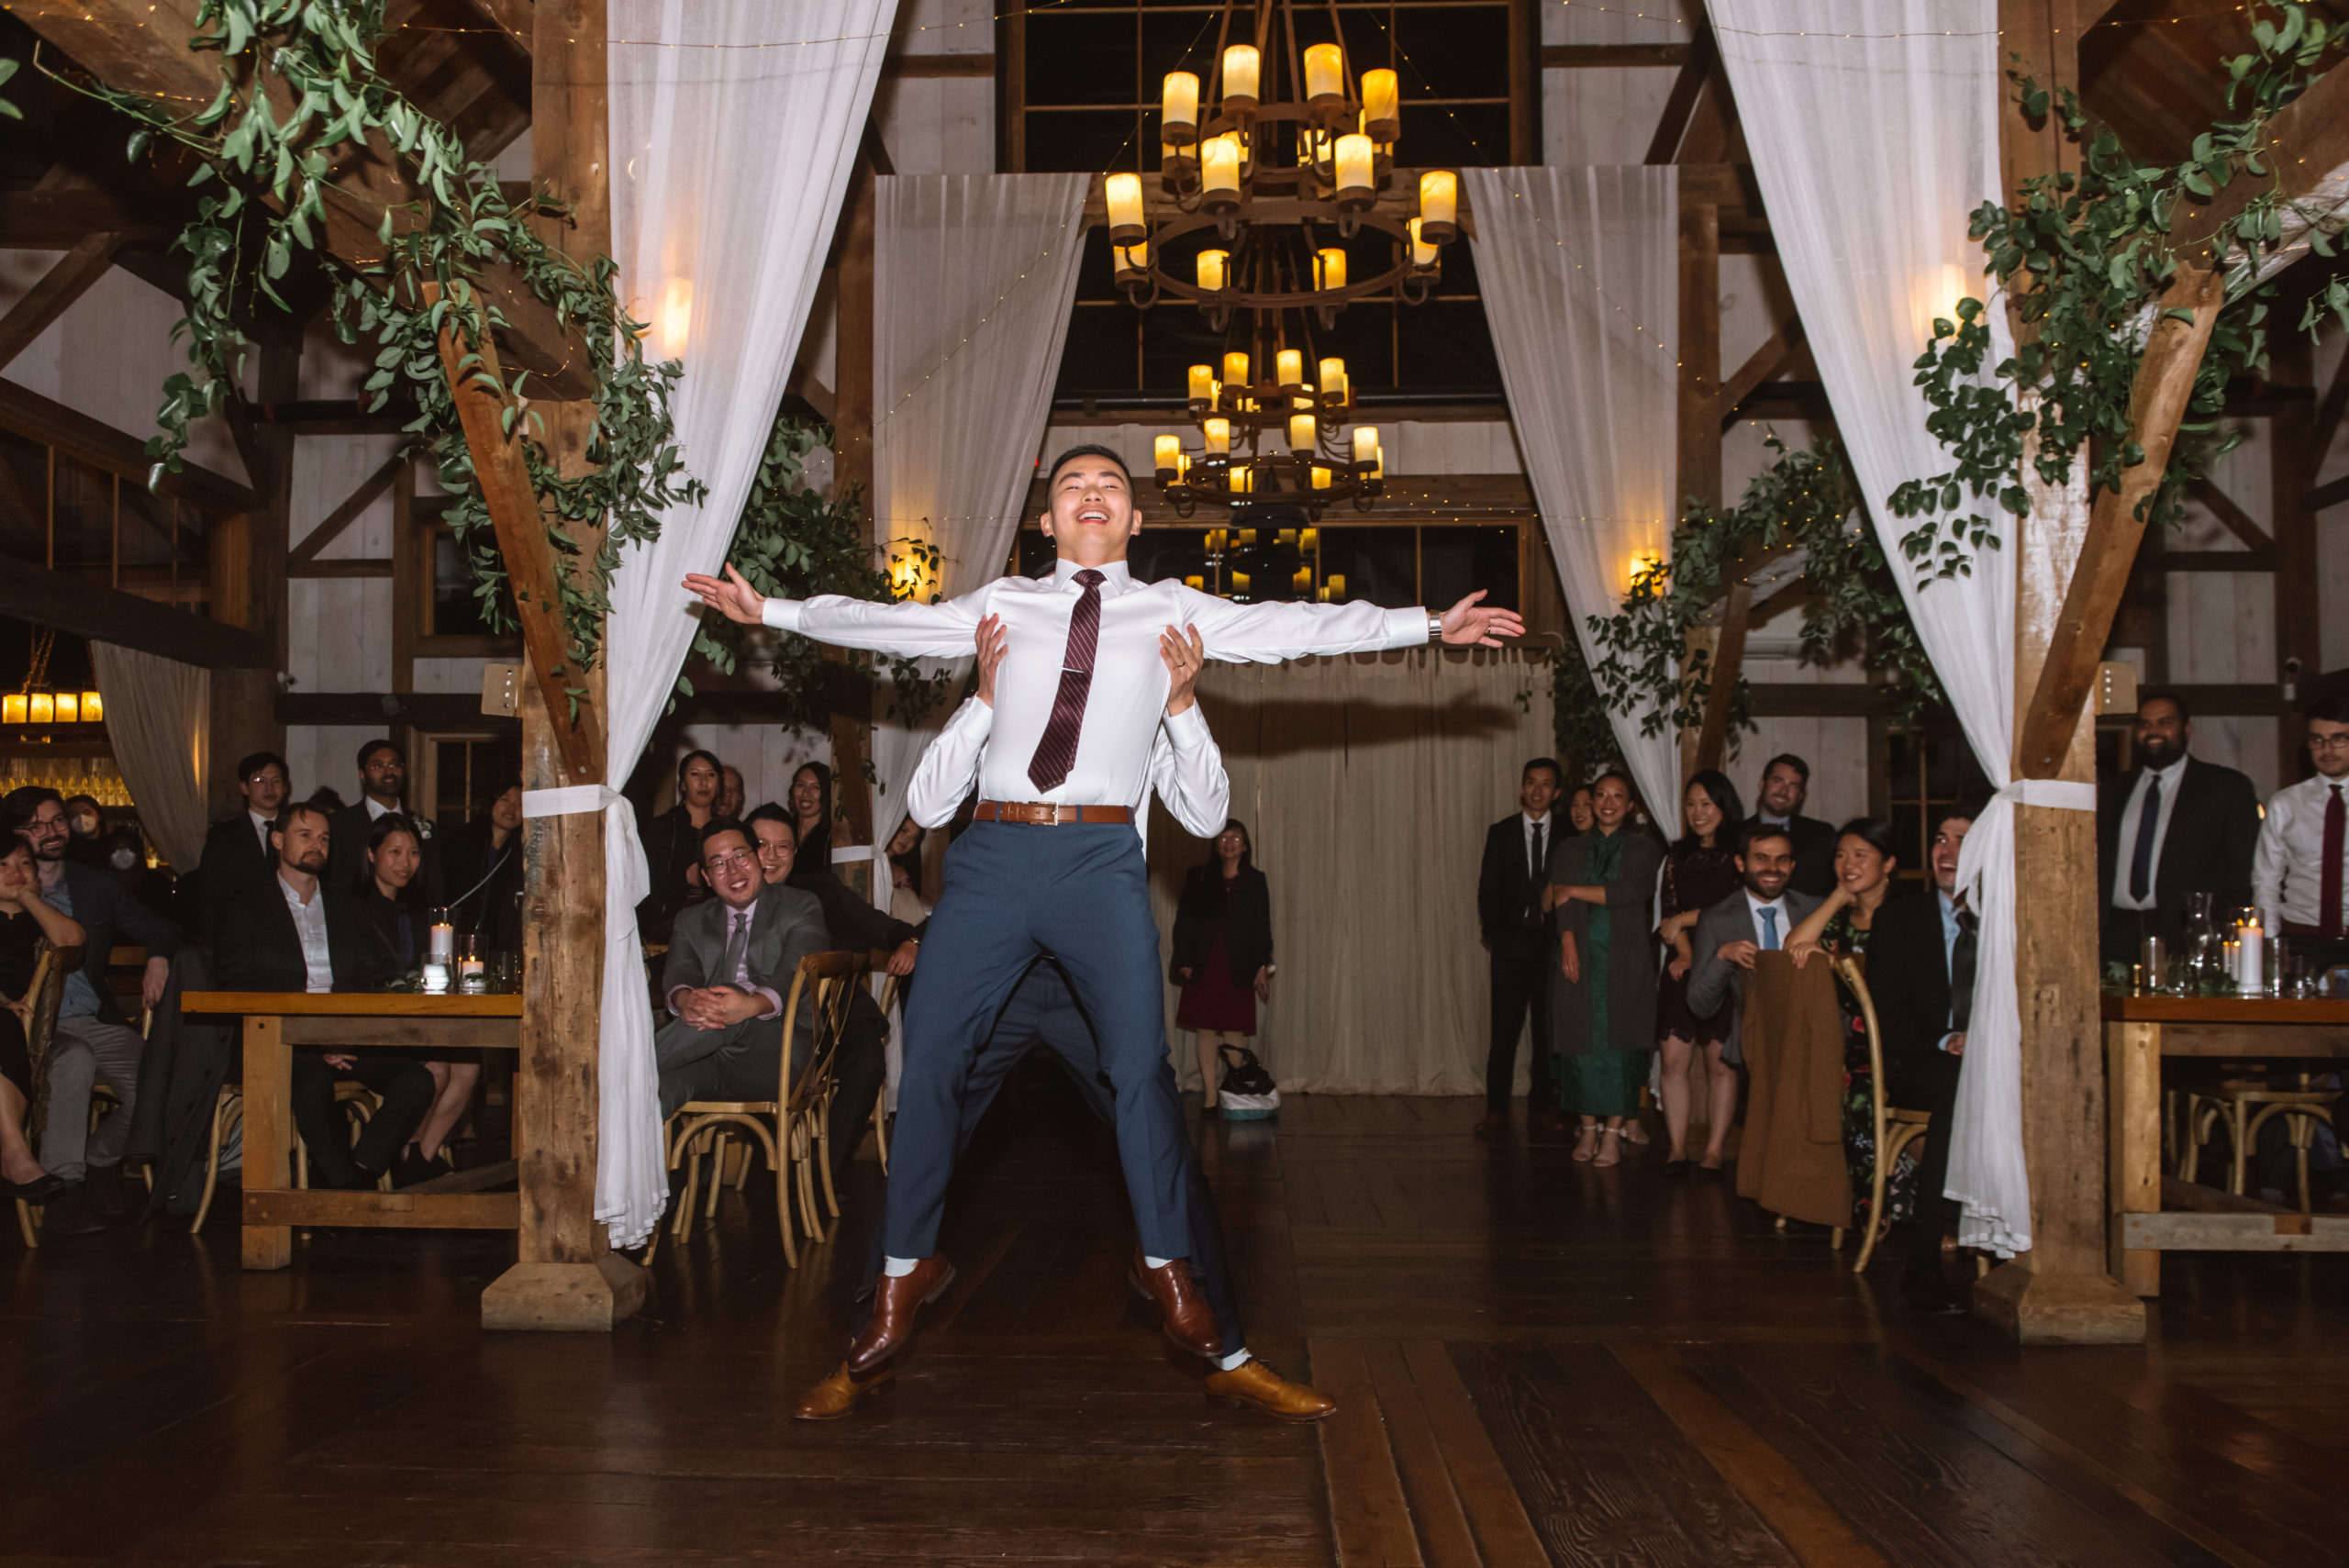 Two grooms having their first dance. One is picking up the other who has his arms outstretched in a wide stance. Their guests are all looking at them and smiling.